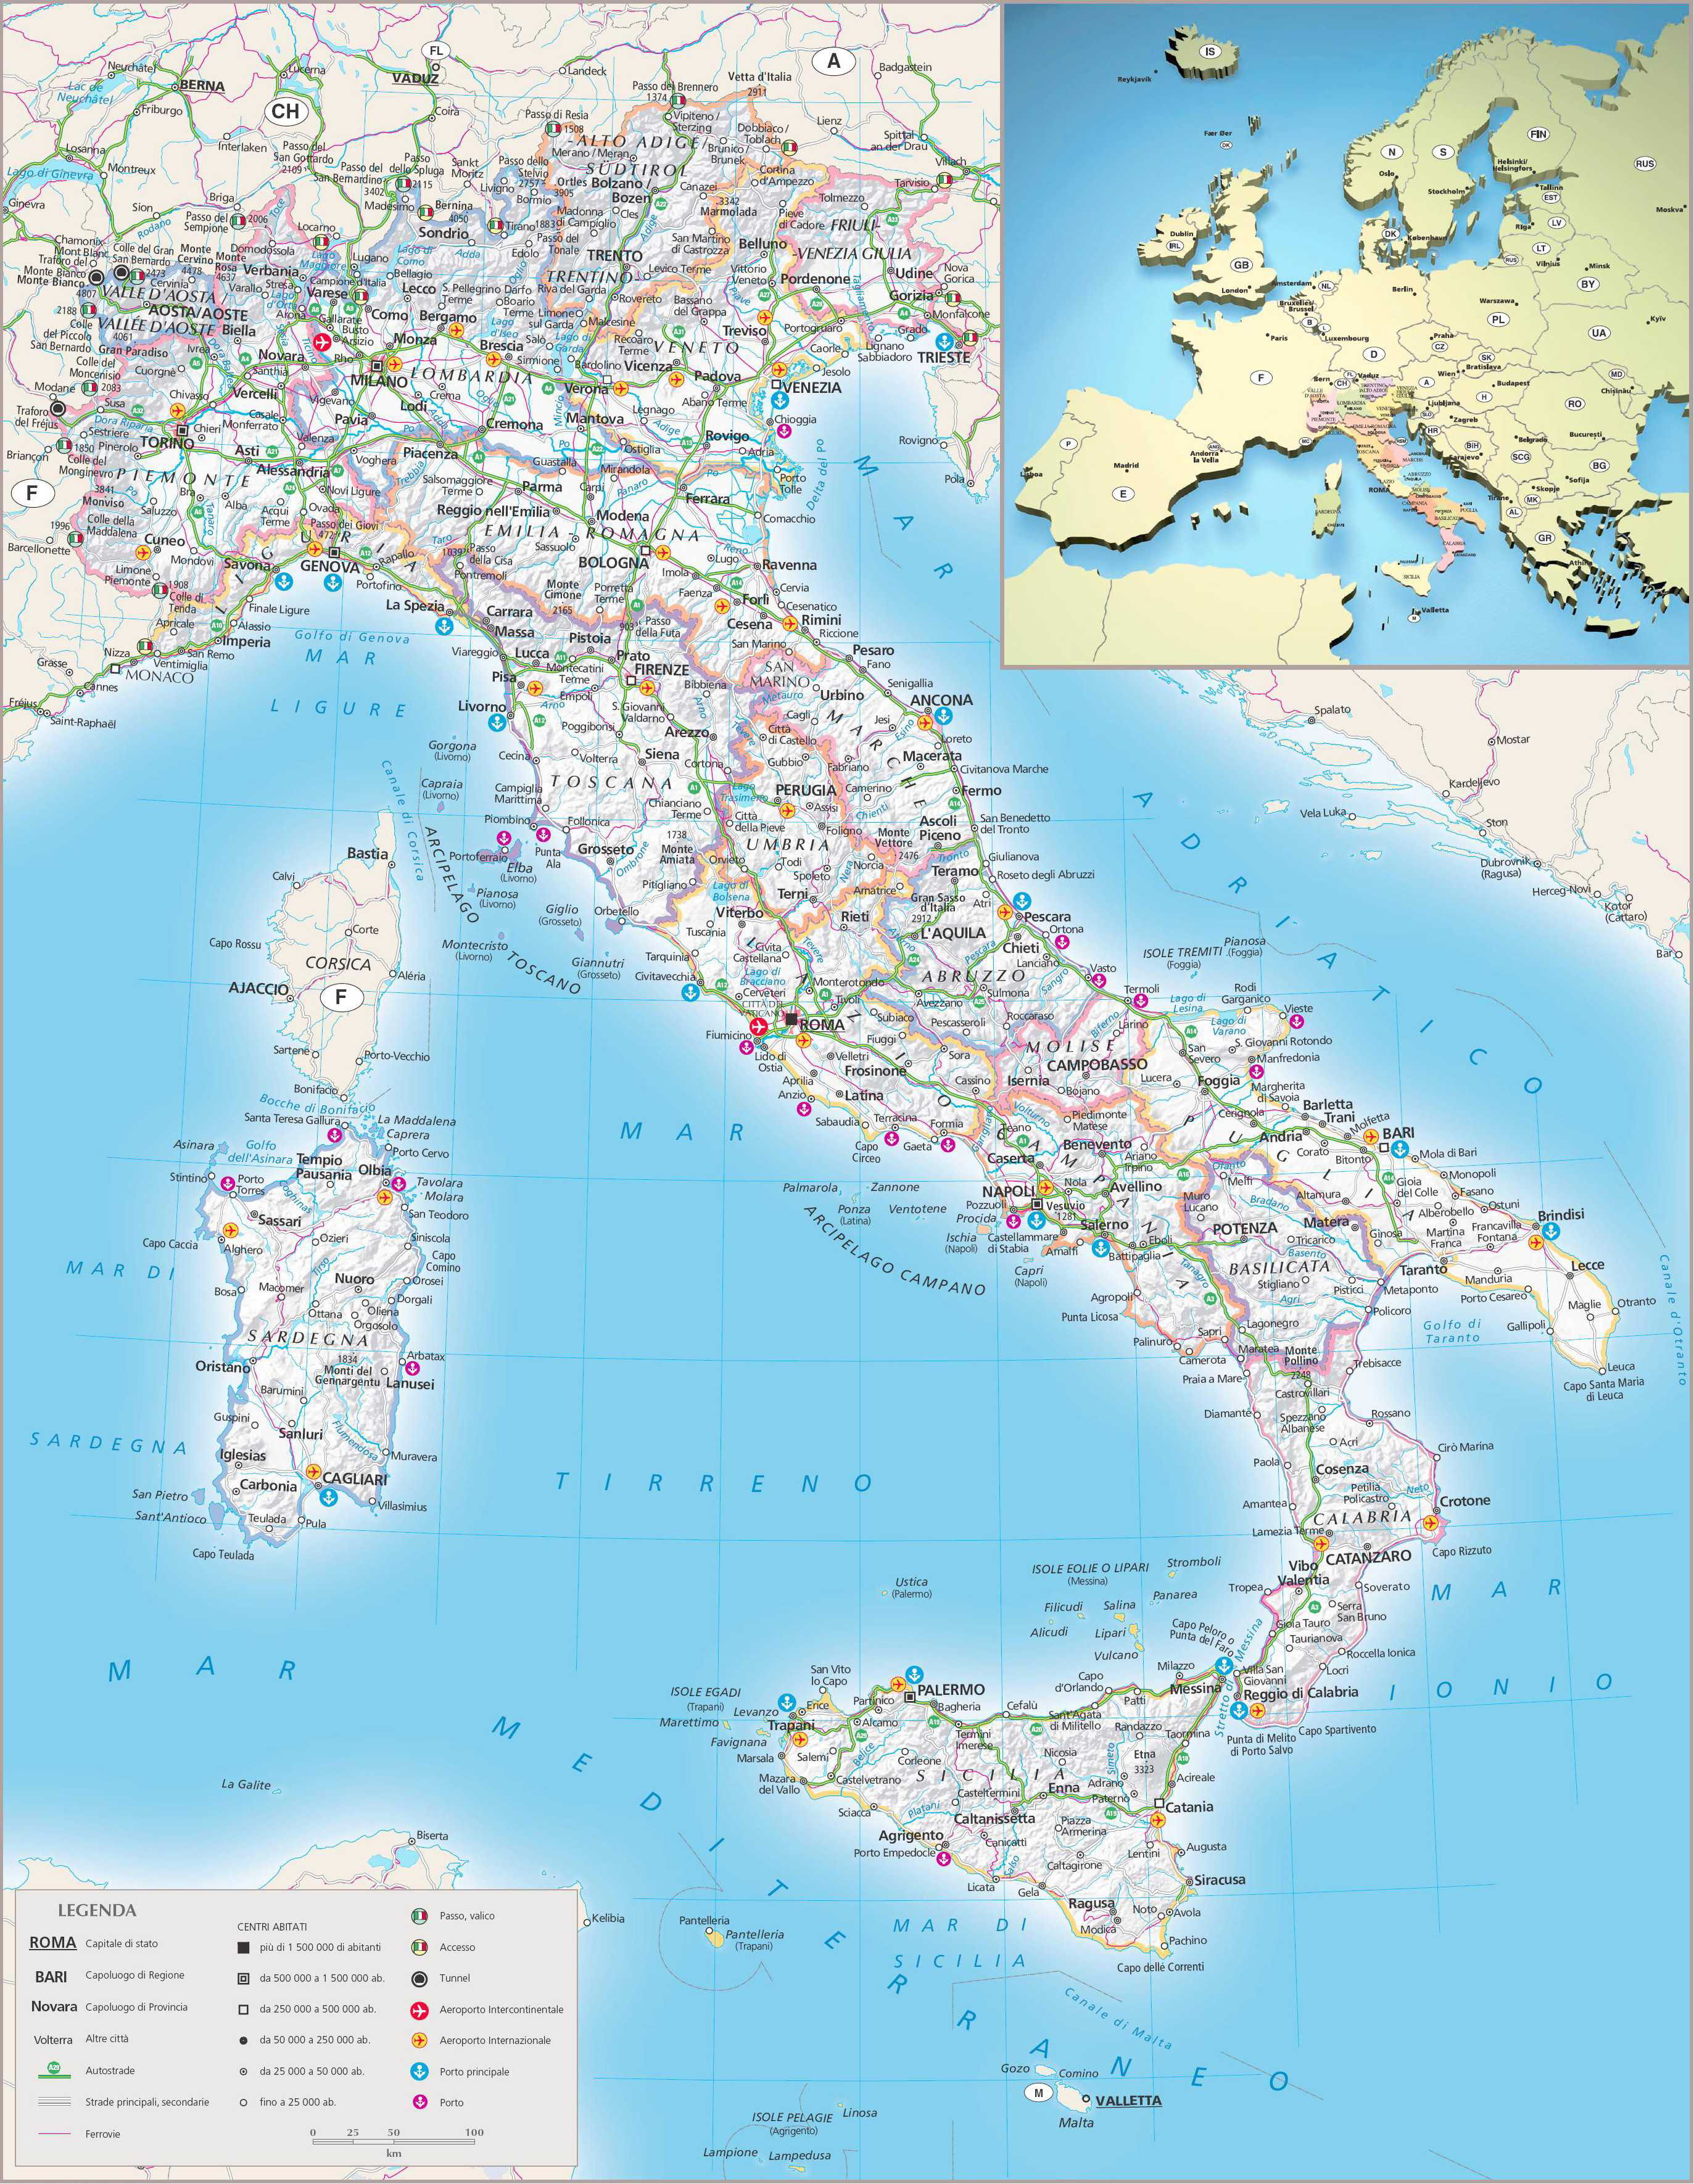 Map Italy Cities